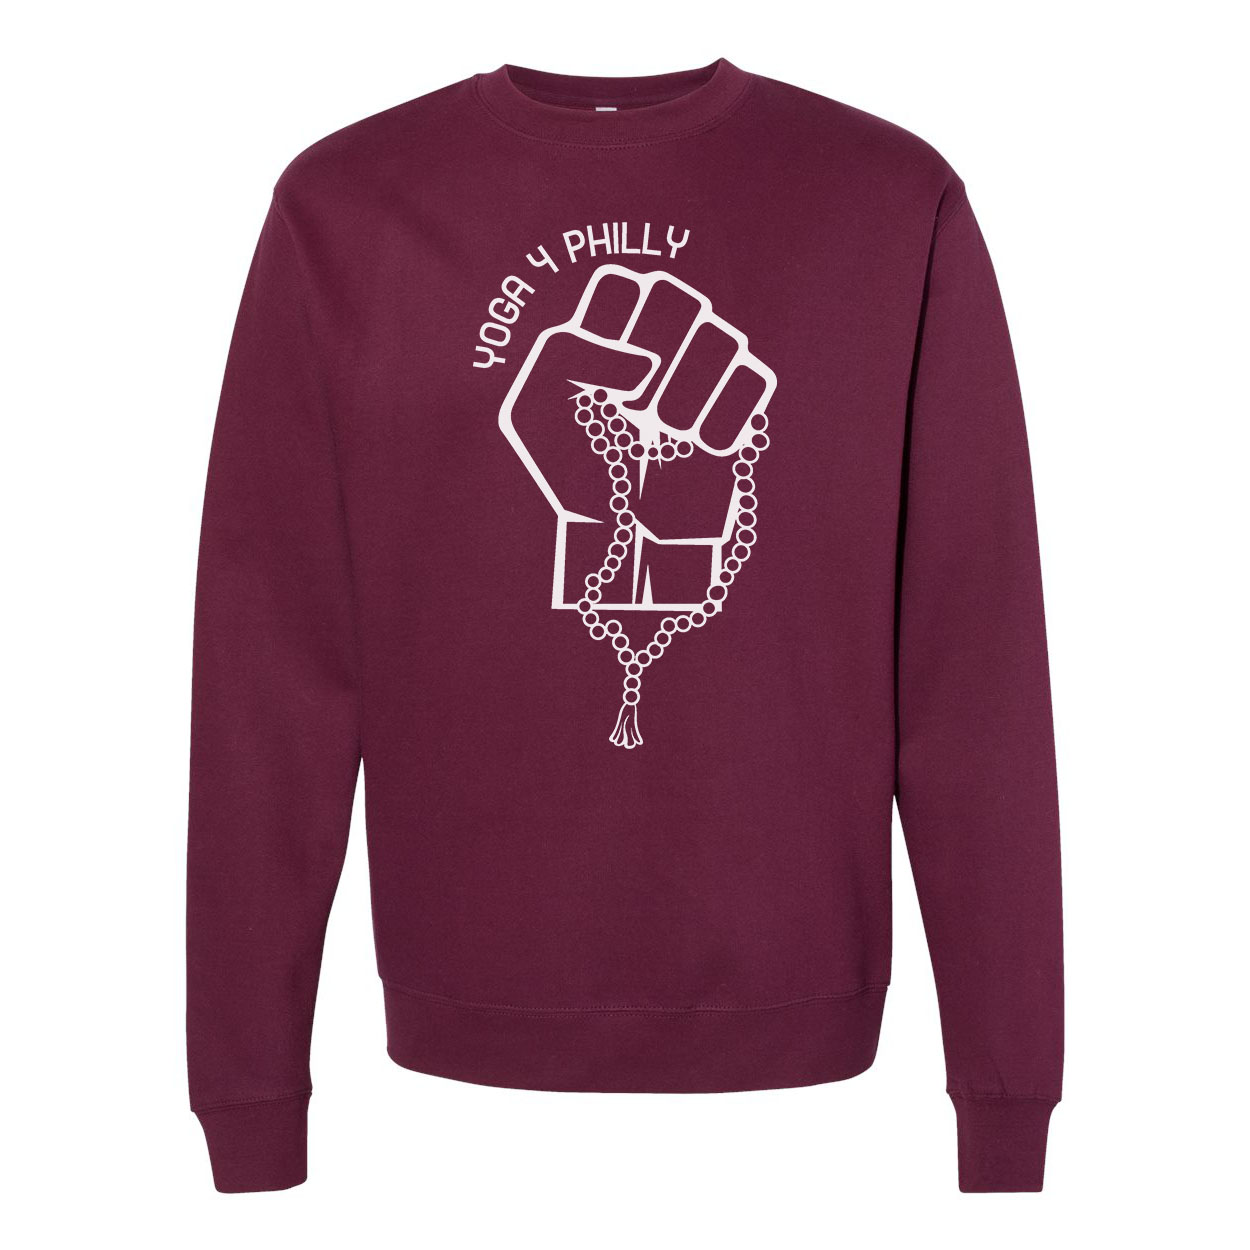 Yoga4Philly Midweight Maroon Crewneck